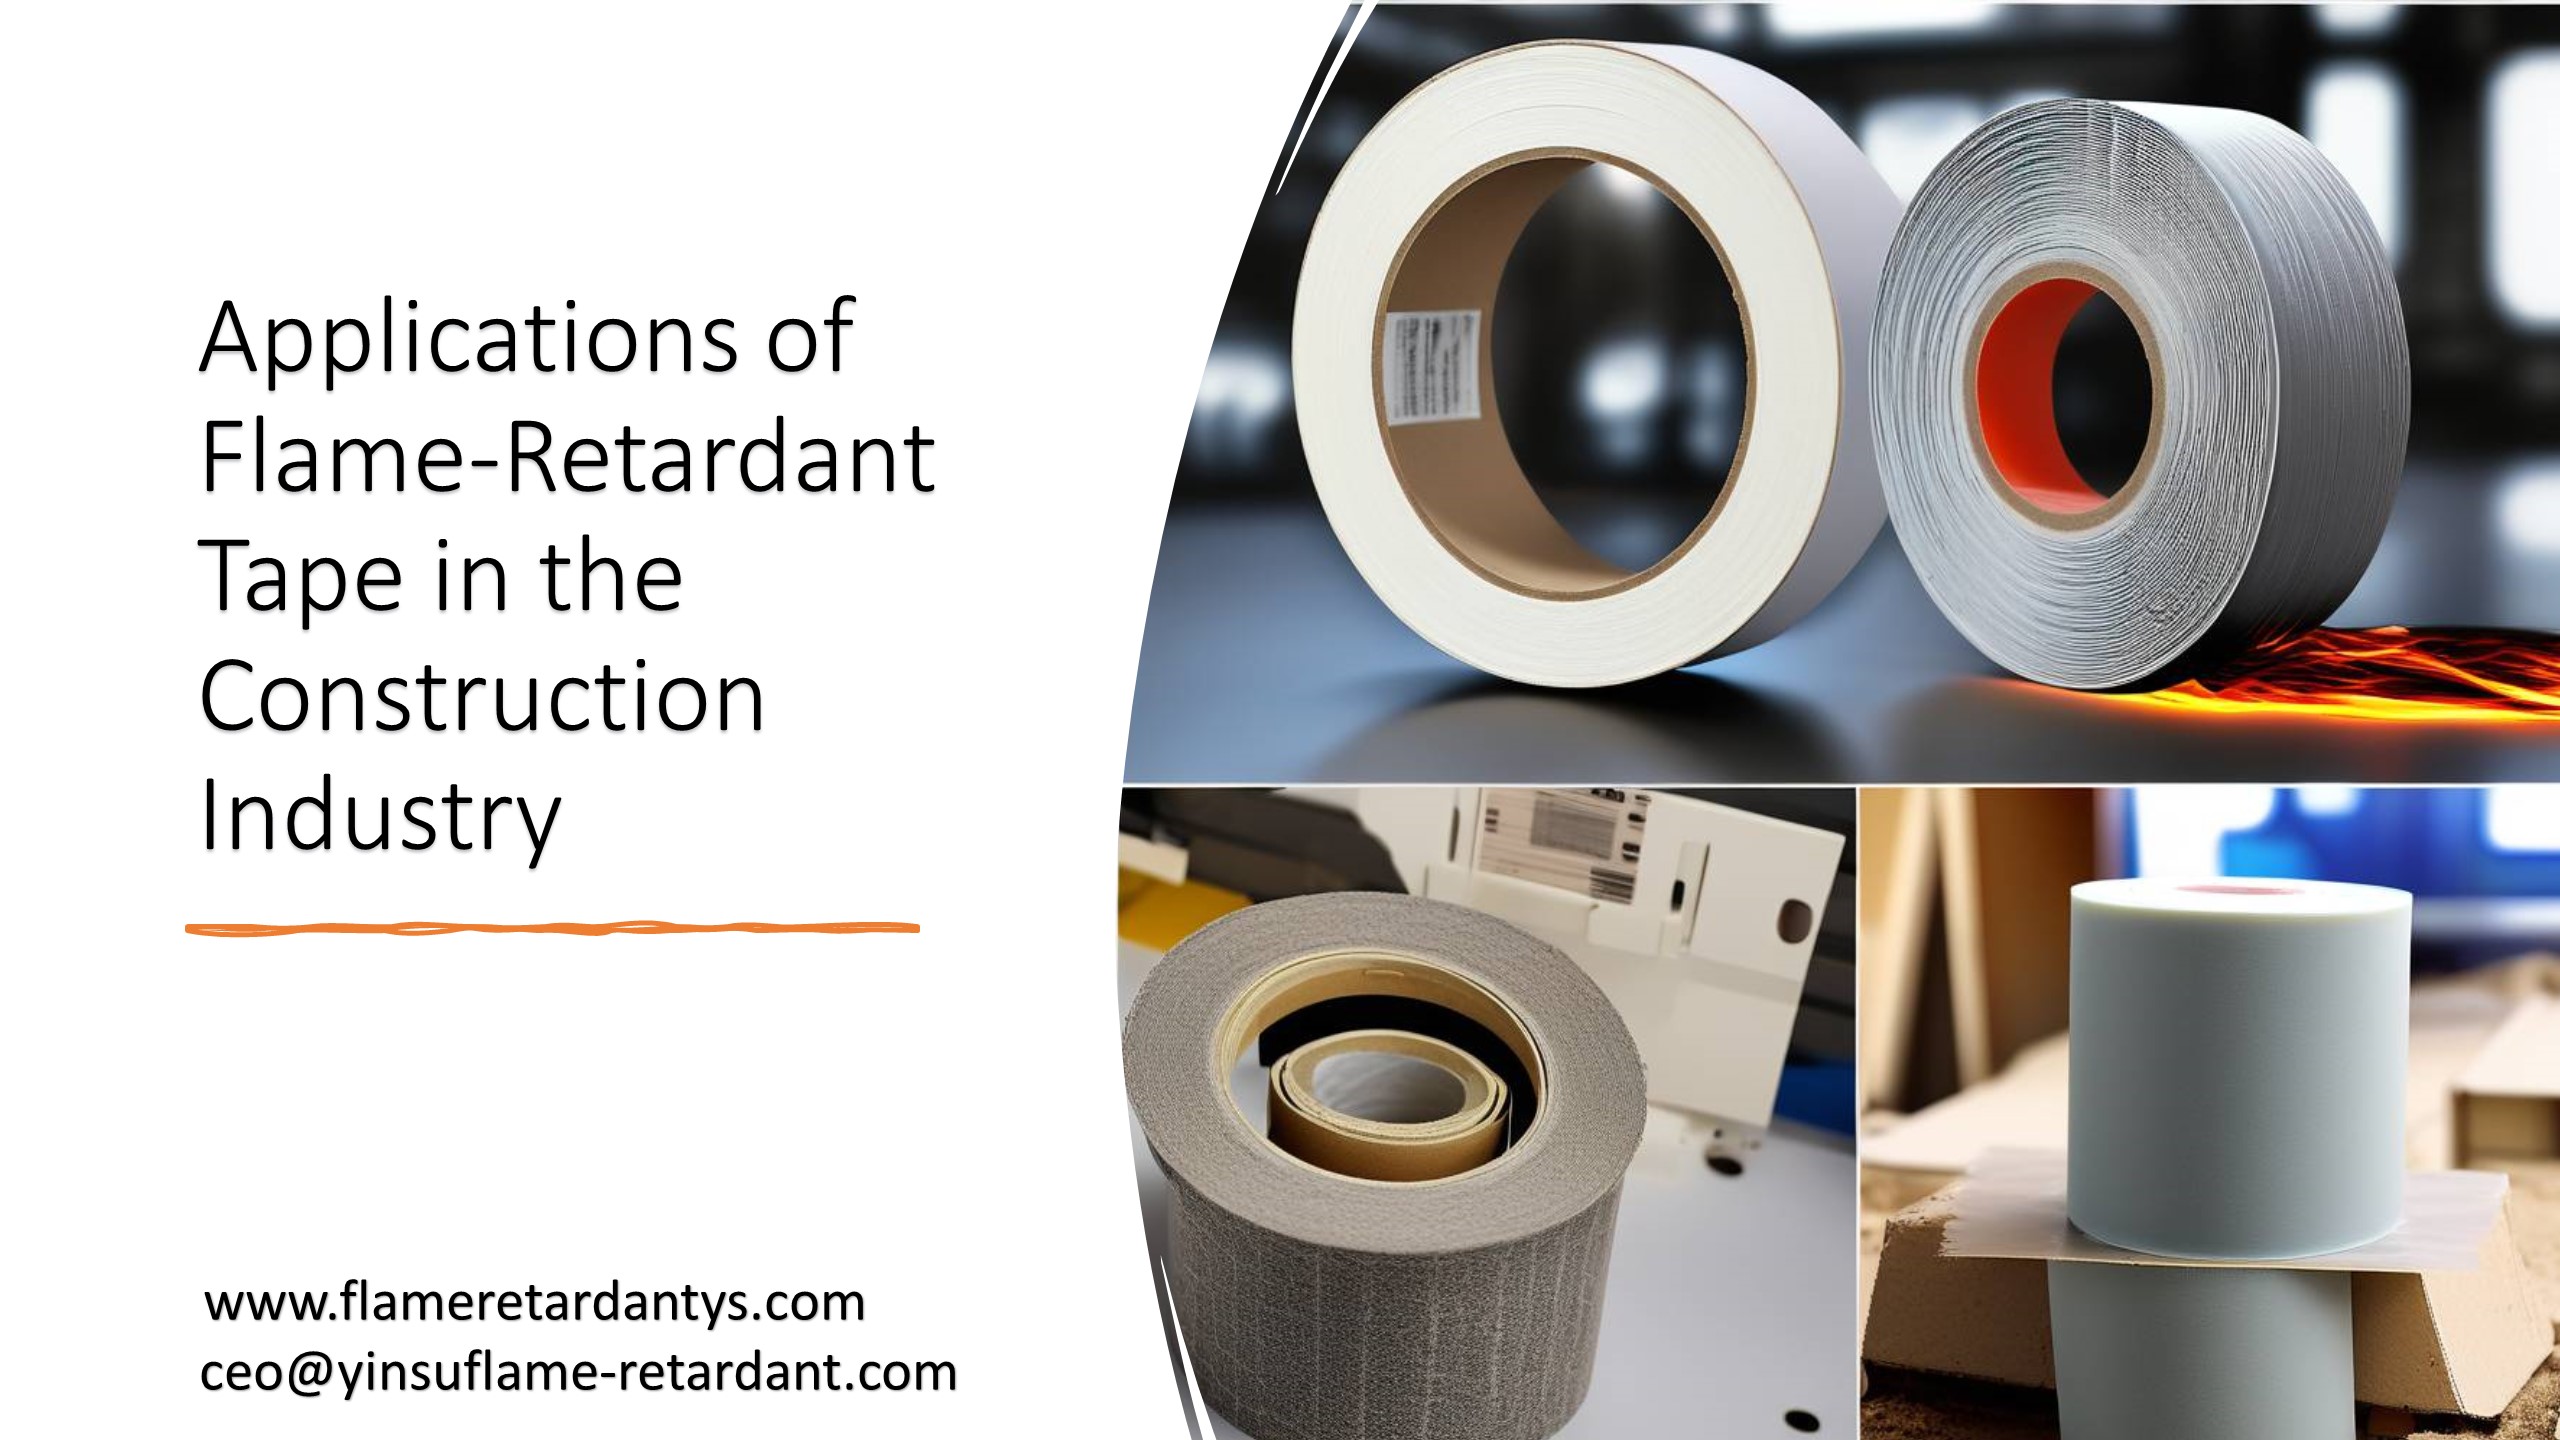 Applications of Flame-Retardant Tape in the Construction Industry